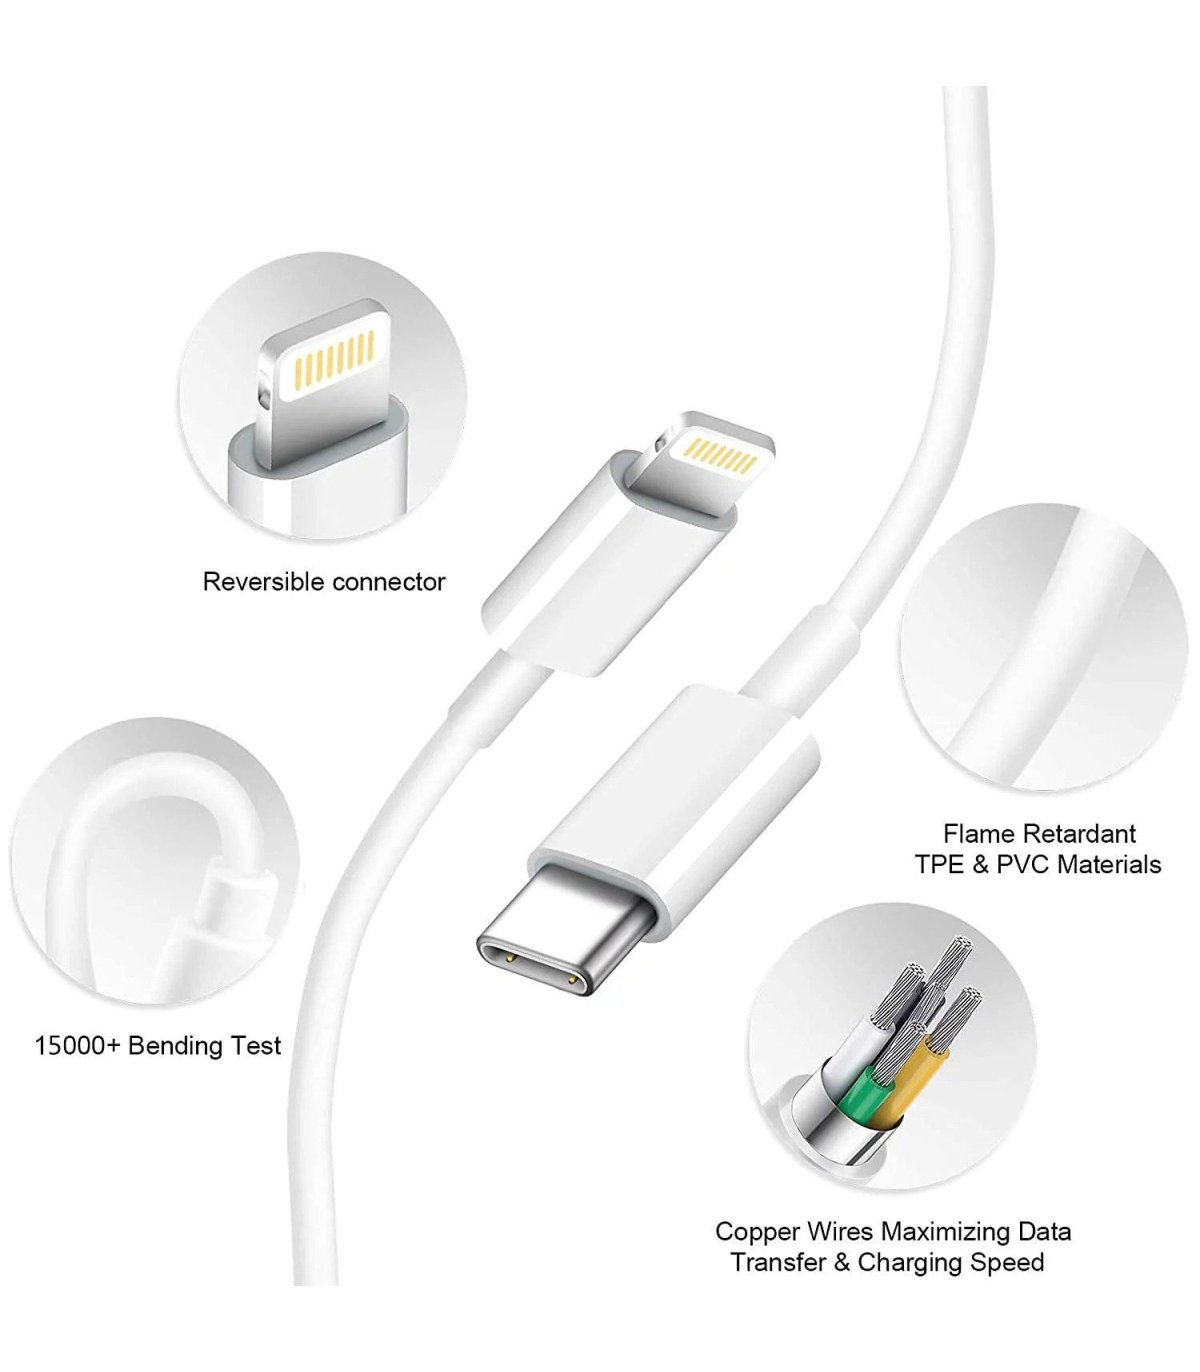 USB Headset to iPhone Adapter  Female USB to Male Lightning Cable